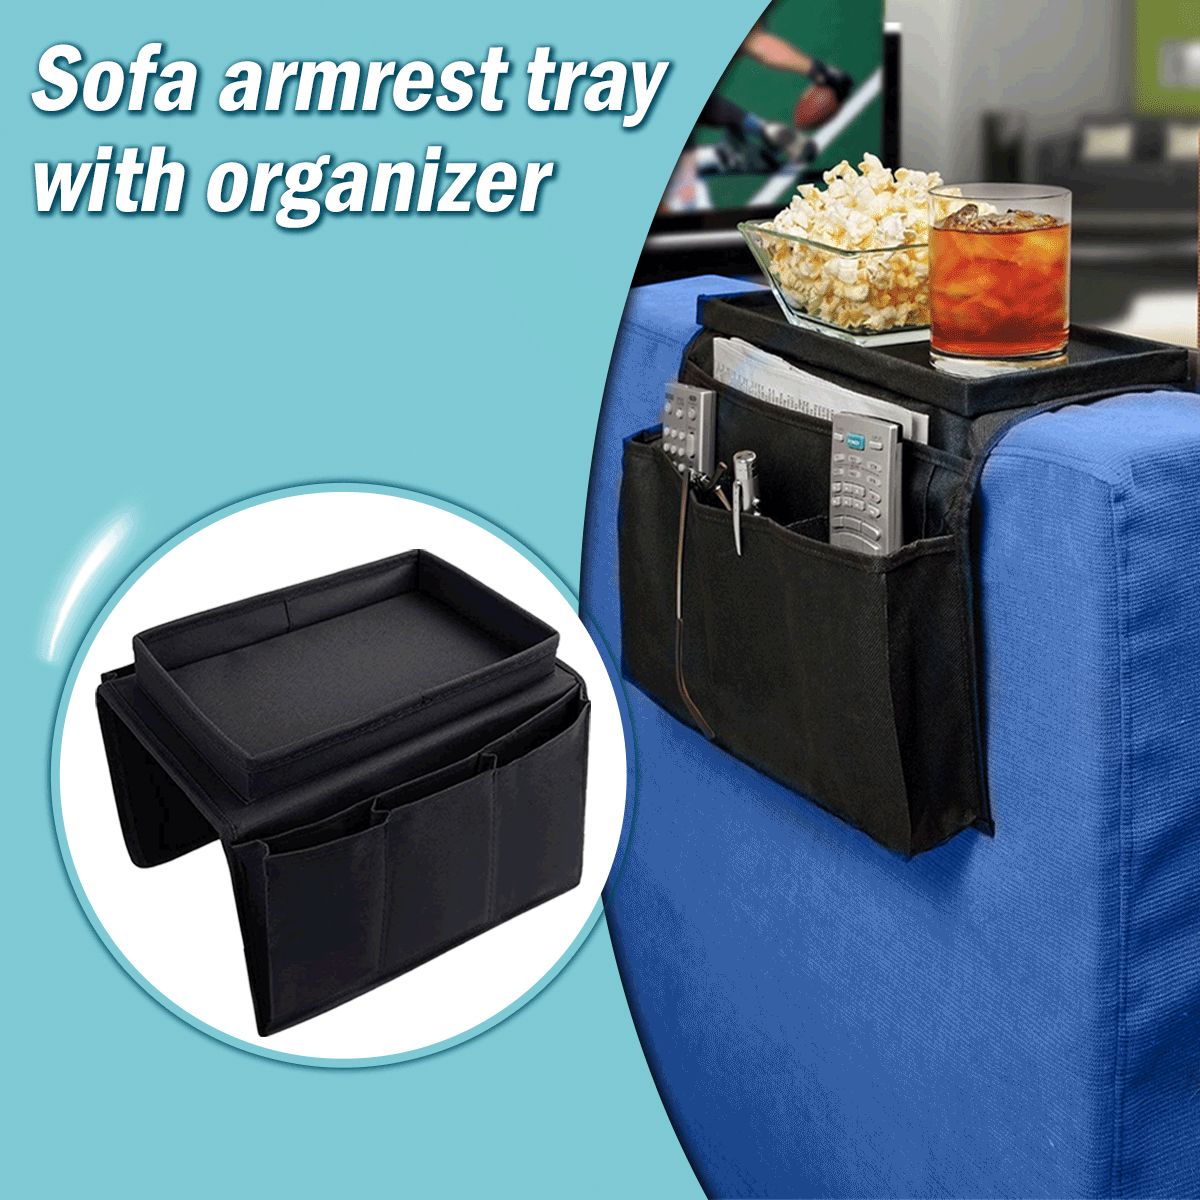 Sofa Armrest Tray With Organizer FAEVEZ™- Home Devices